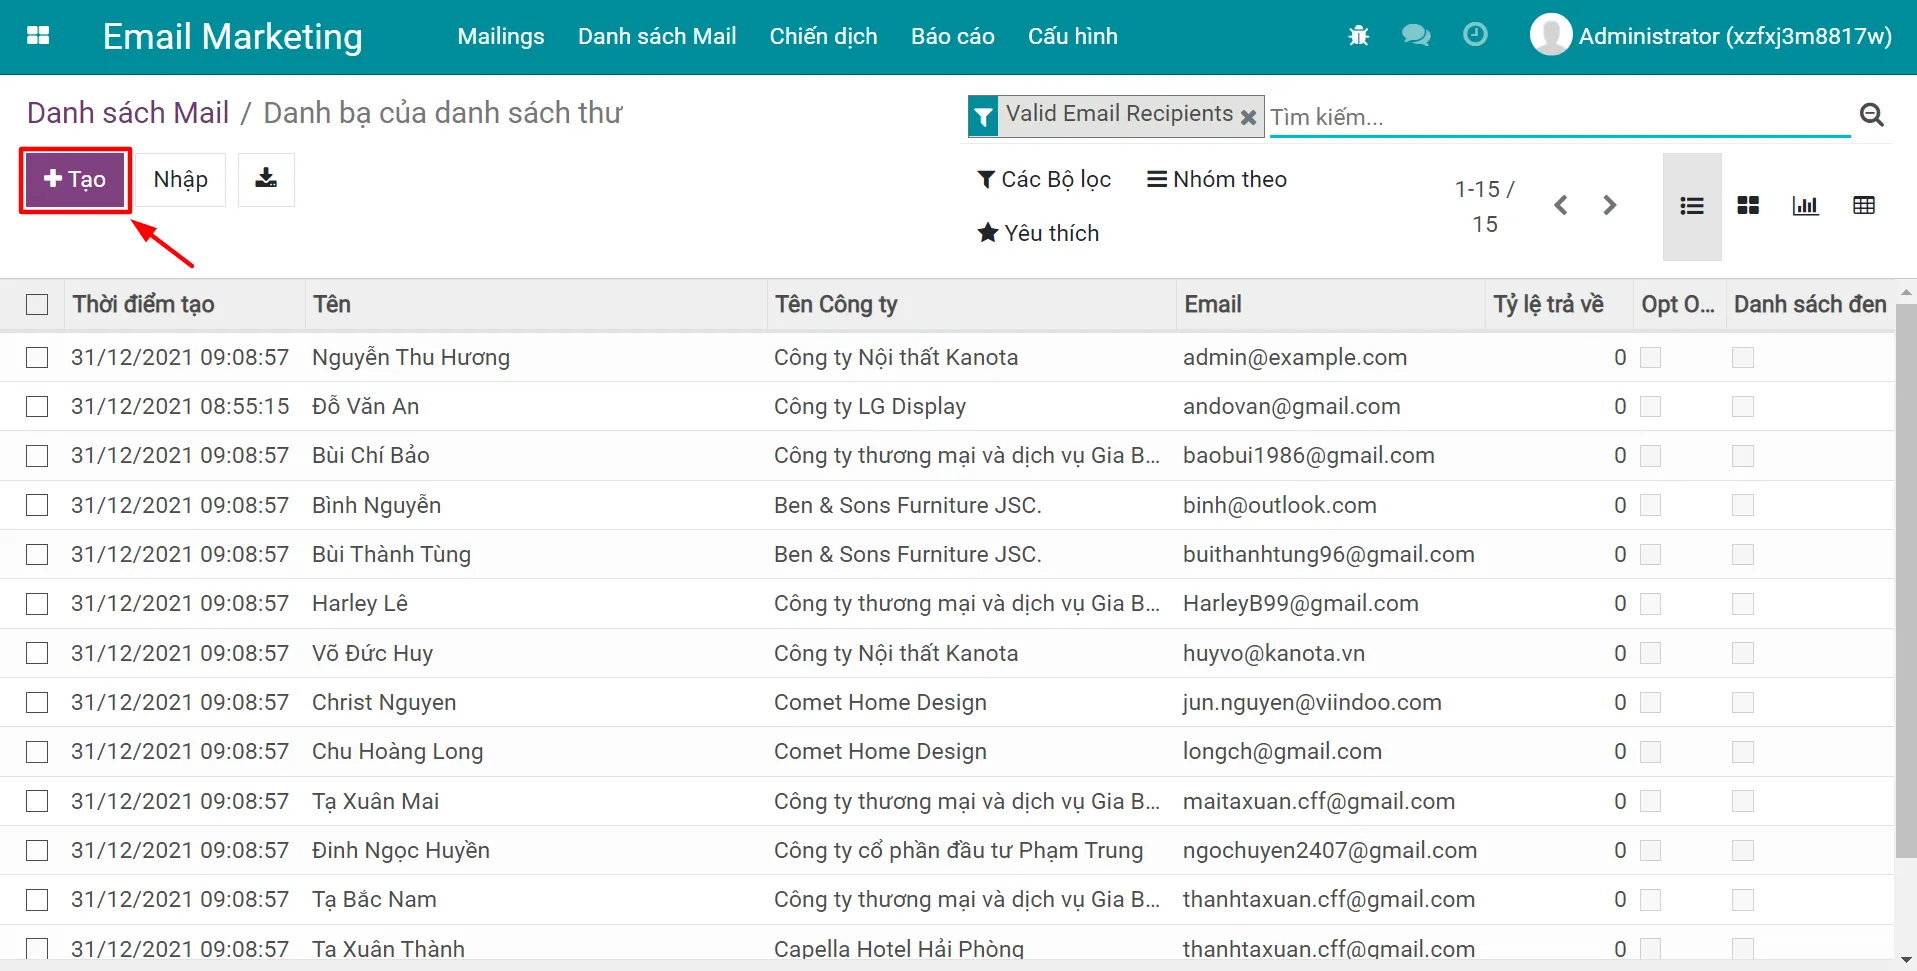 Cach-tao-lien-he-moi-trong-ung-dung-Email-Marketing-cua-Odoo-ERPOnline